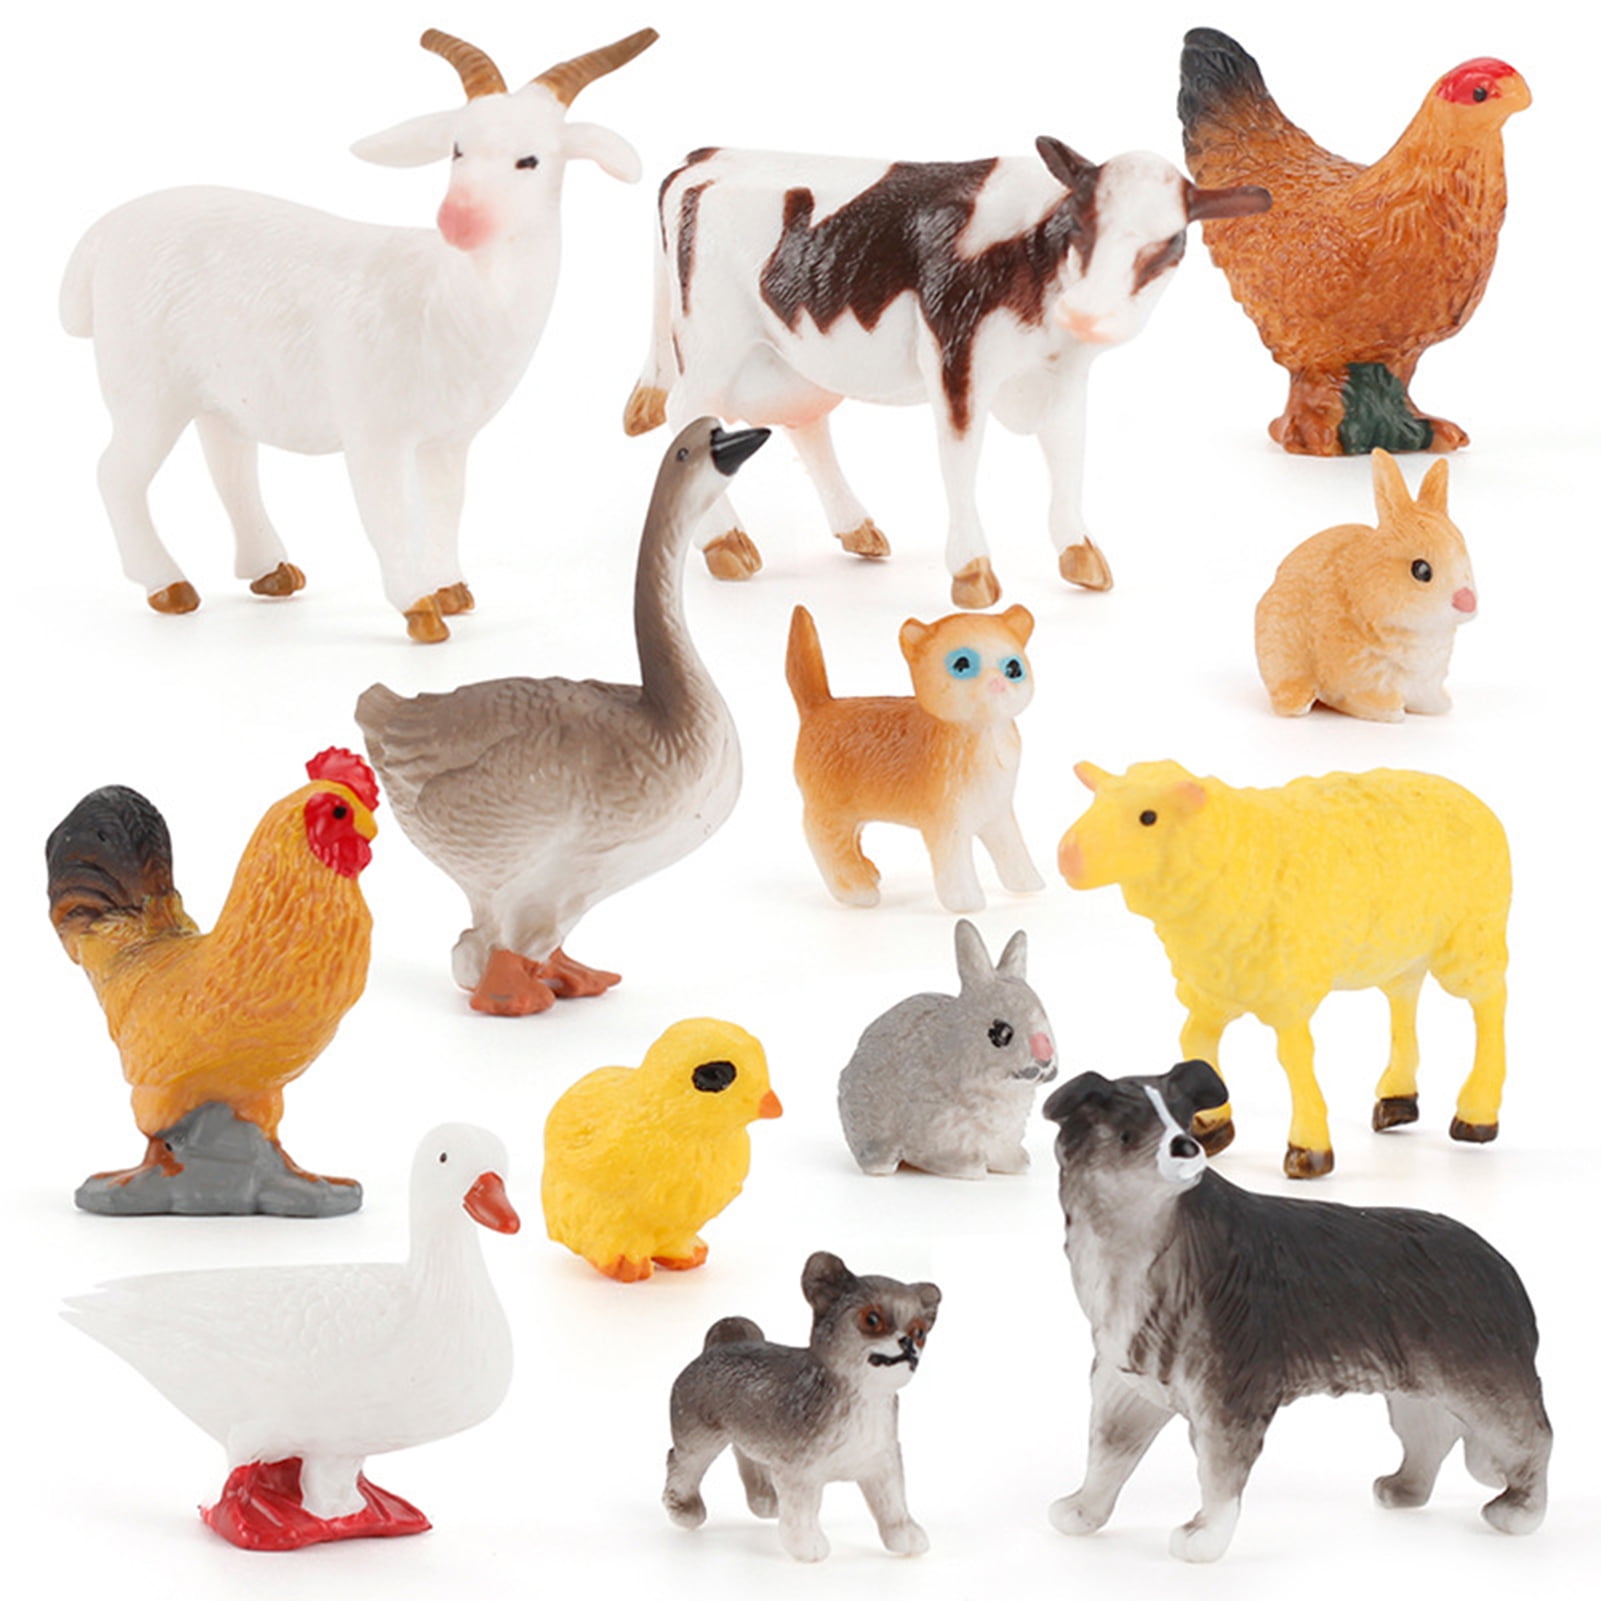 5pcs Fisher Price Little People Farm Barn Animals Pig Duck Chick Cow & Bunny 